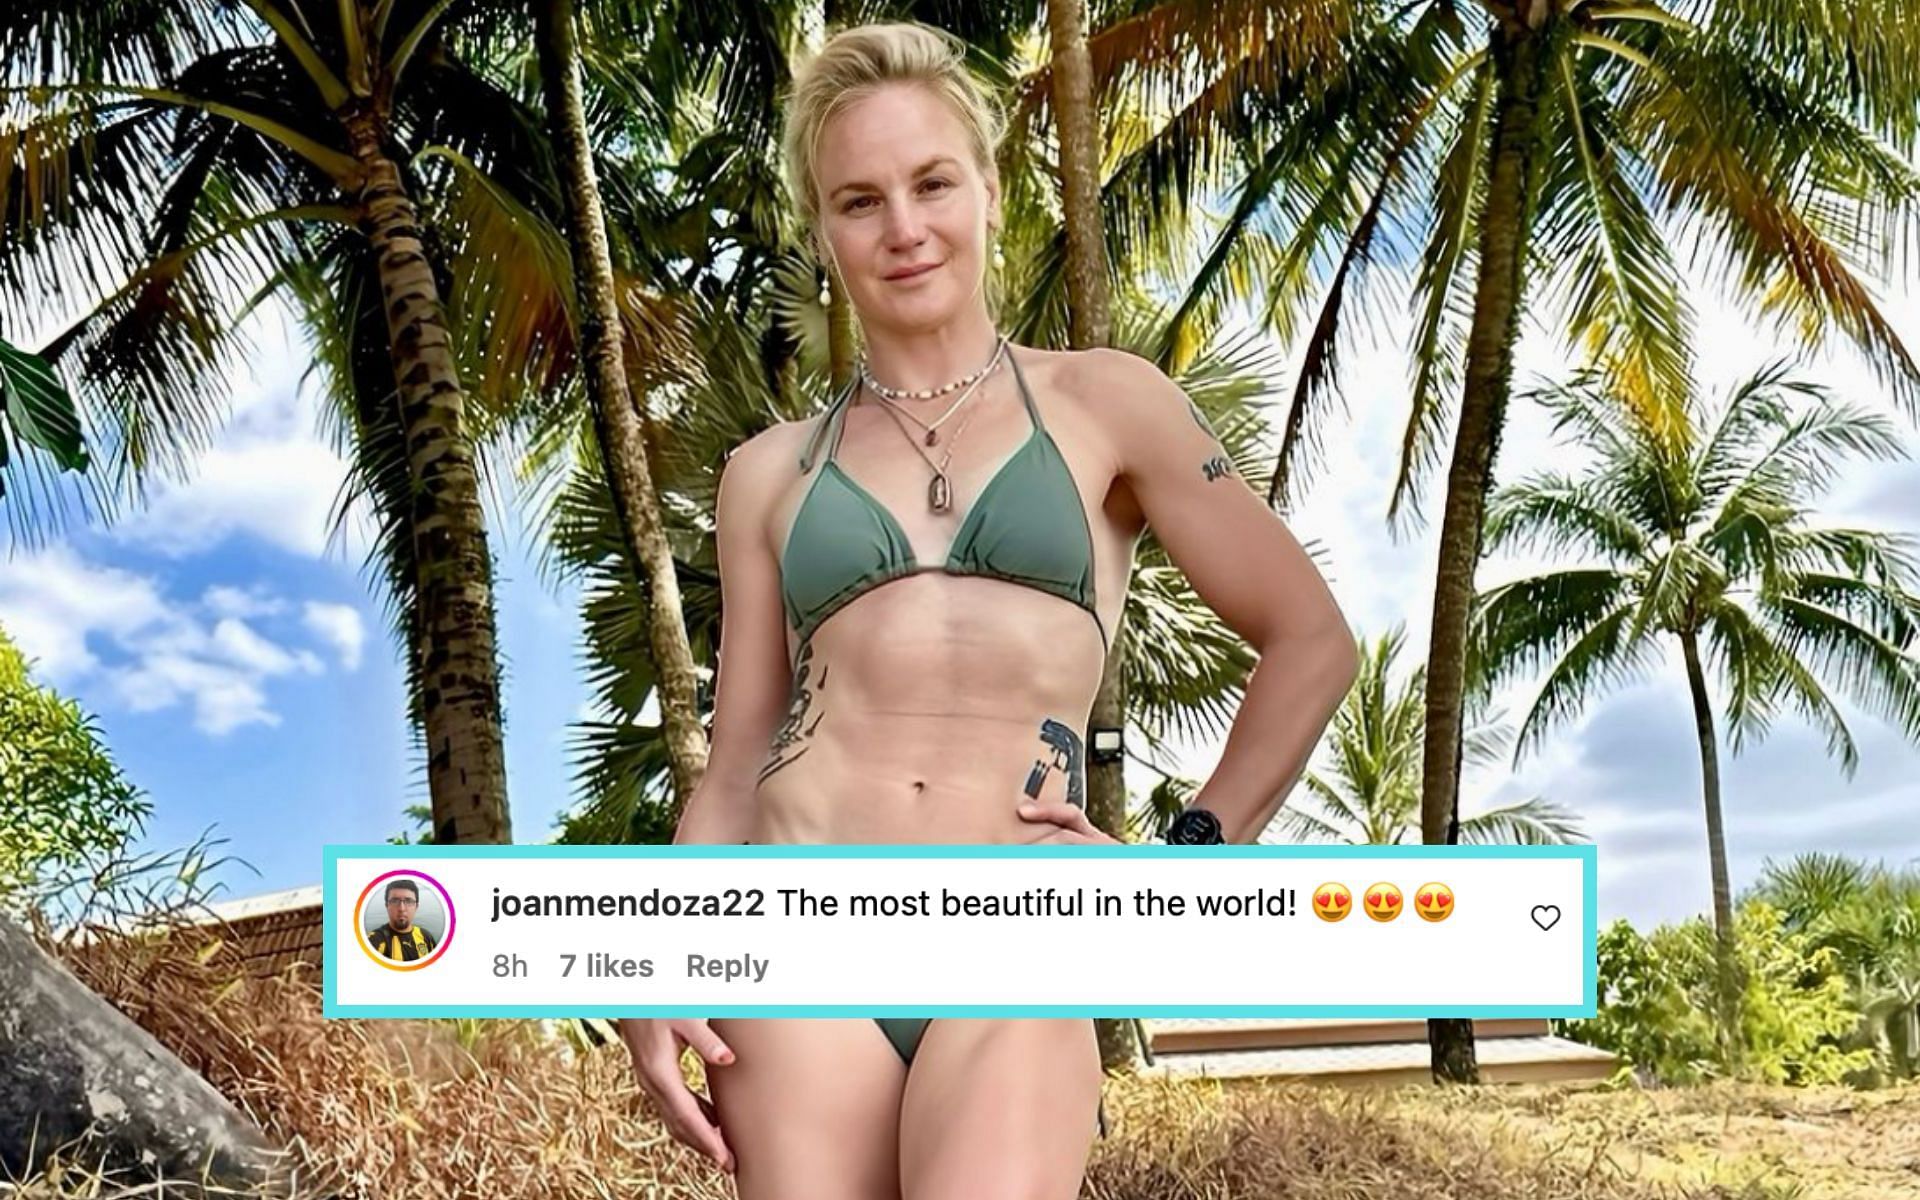 Valentina Shevchenko posting another photo from her vacation in Thailand [Photo Courtesy @bulletvalentina on Instagram]